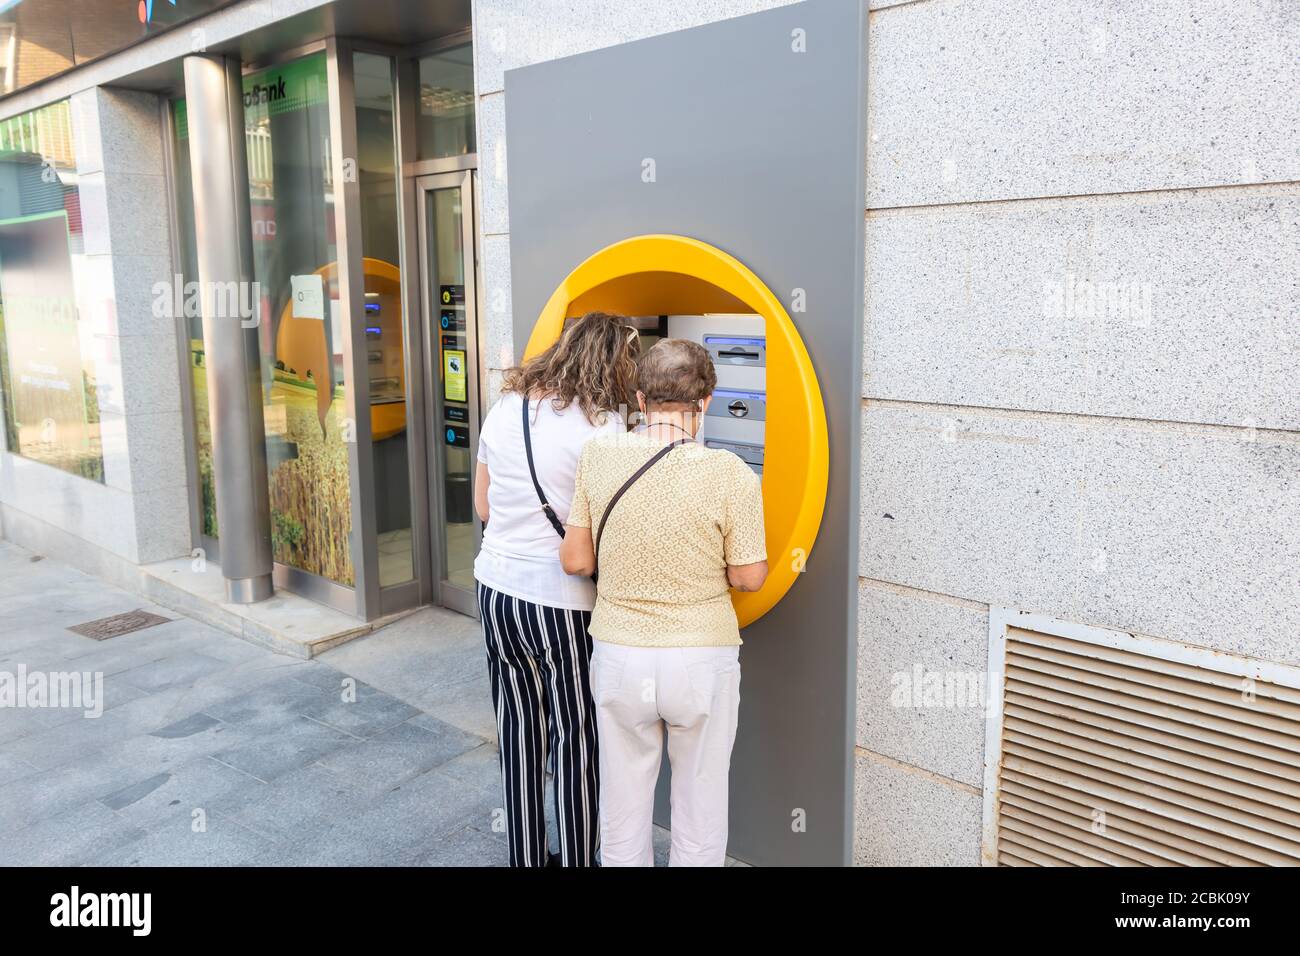 Huelva, Spain - August 13, 2020: Unidentified women using bank credit card in ATM machine is wearing a protective face mask due to covid-19 coronaviru Stock Photo